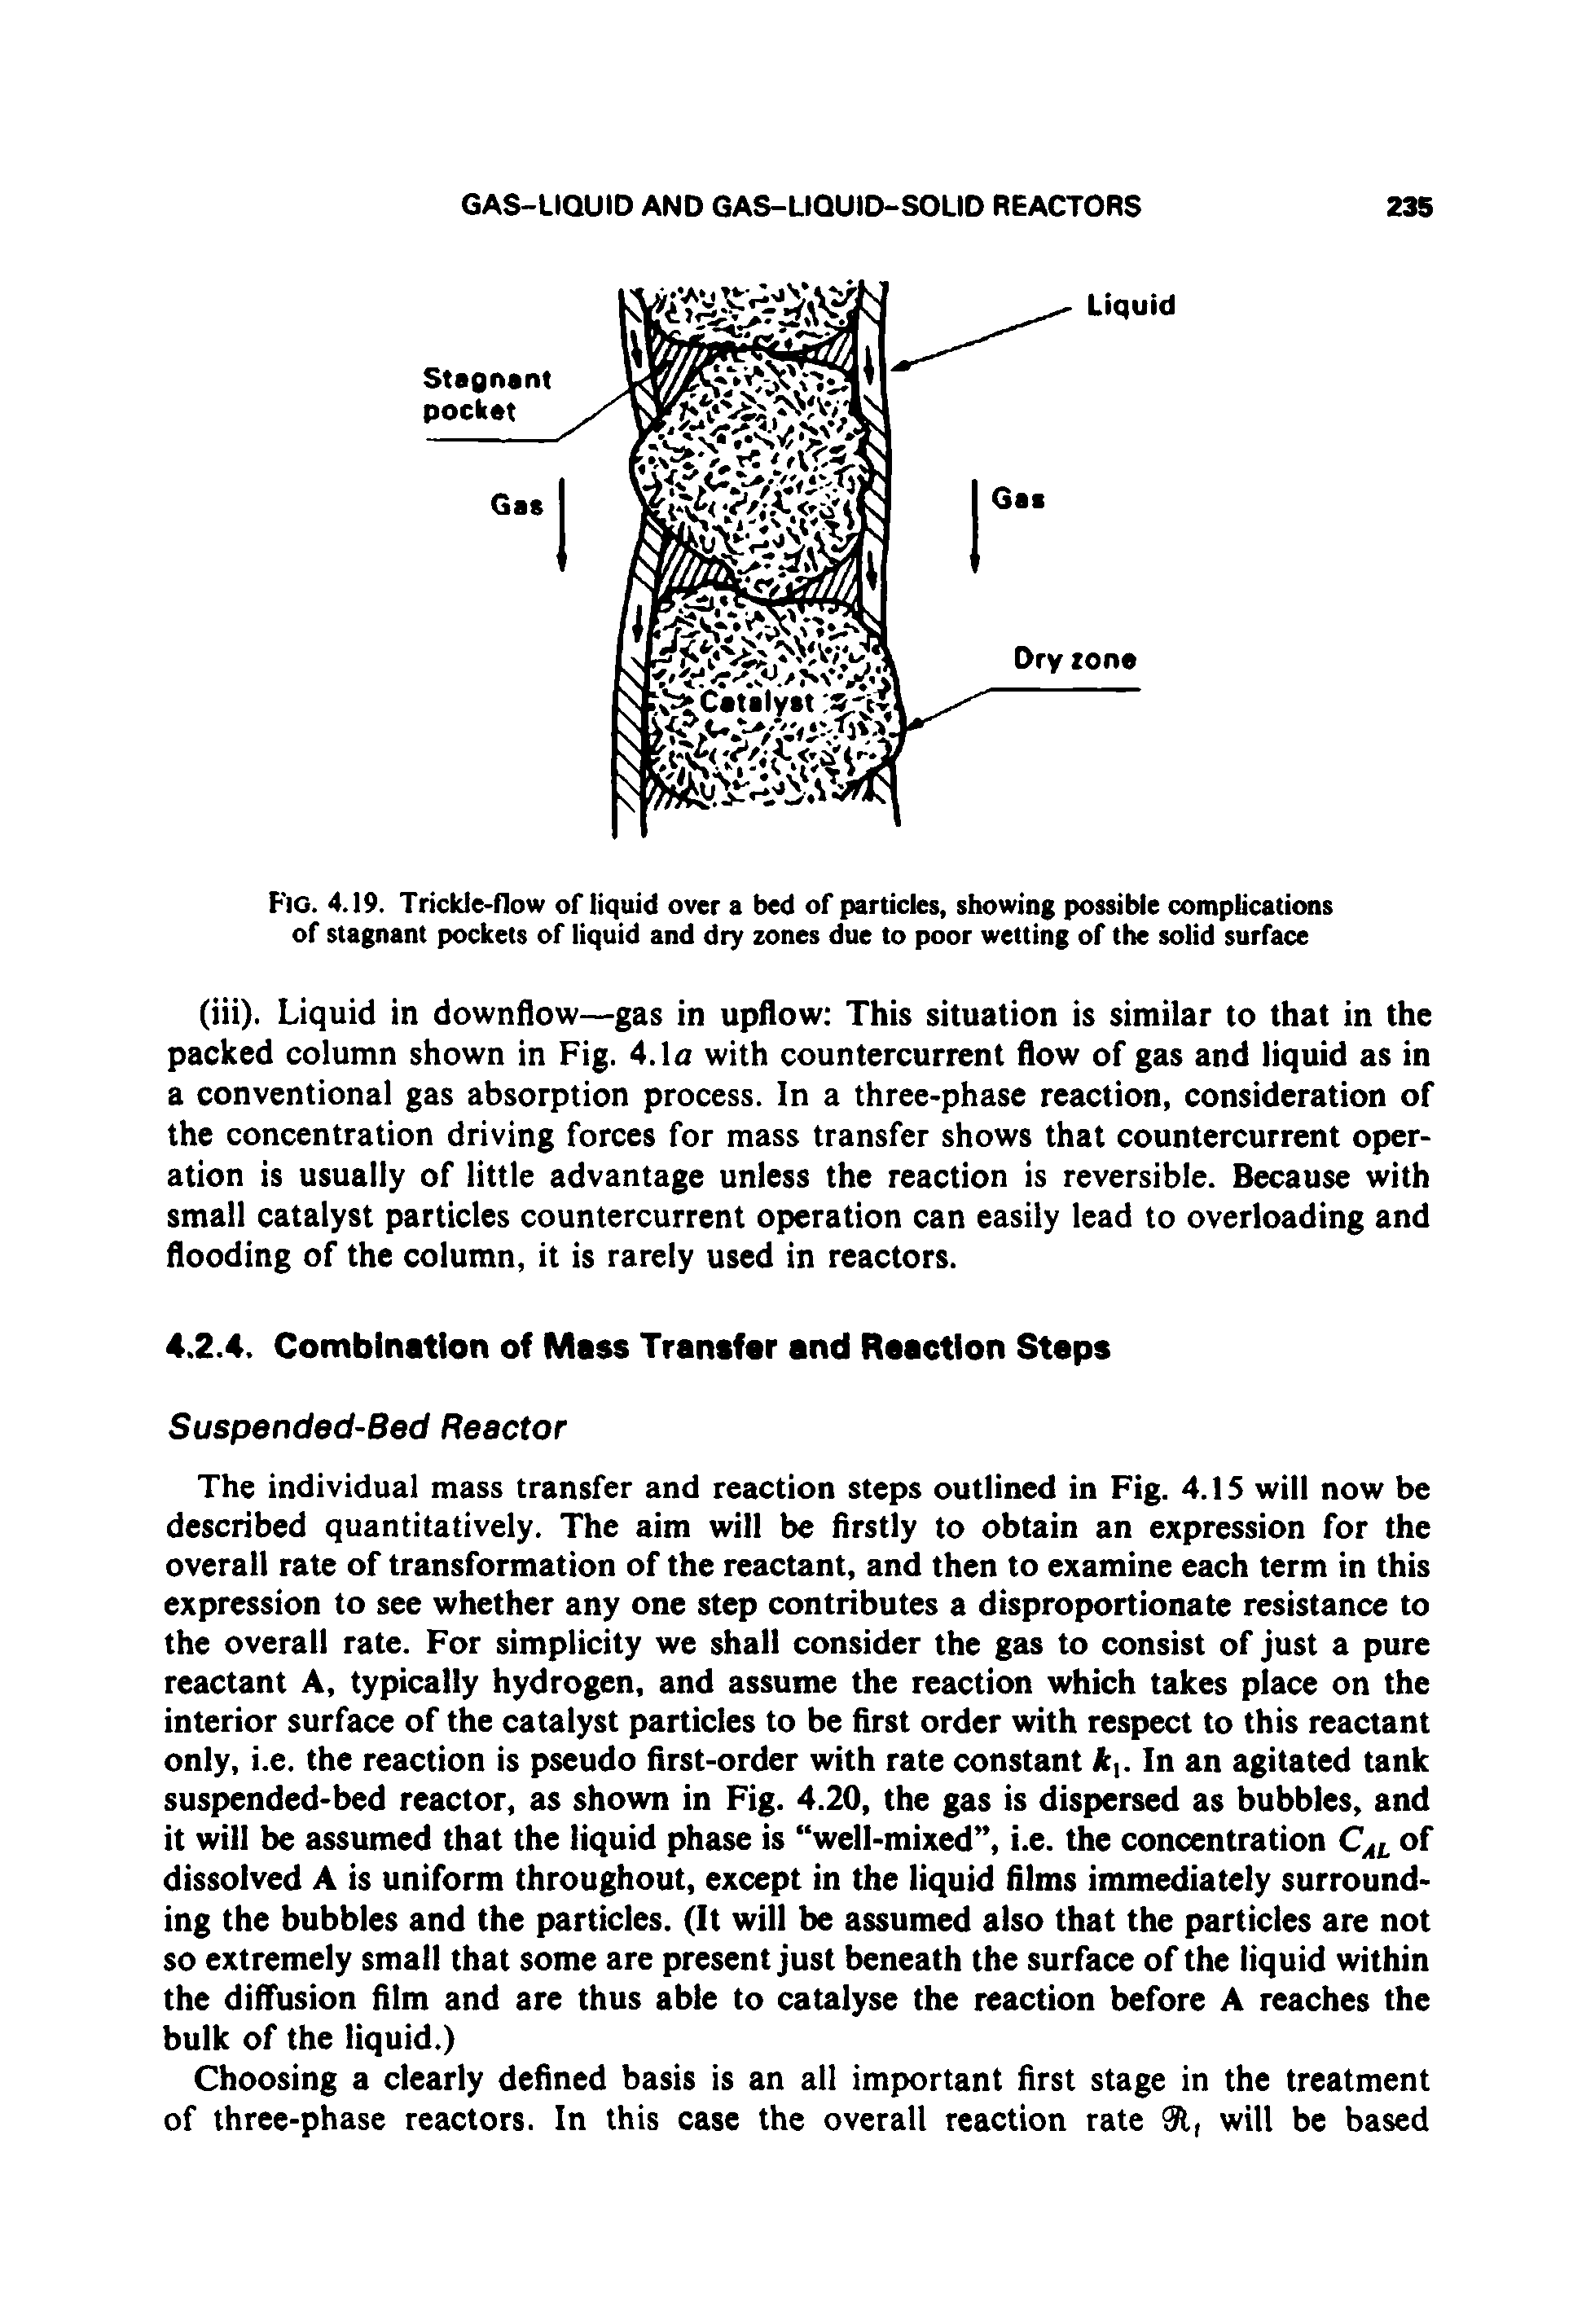 Fig. 4.19. Trickle-flow of liquid over a bed of particles, showing possible complications of stagnant pockets of liquid and dry zones due to poor wetting of the solid surface...